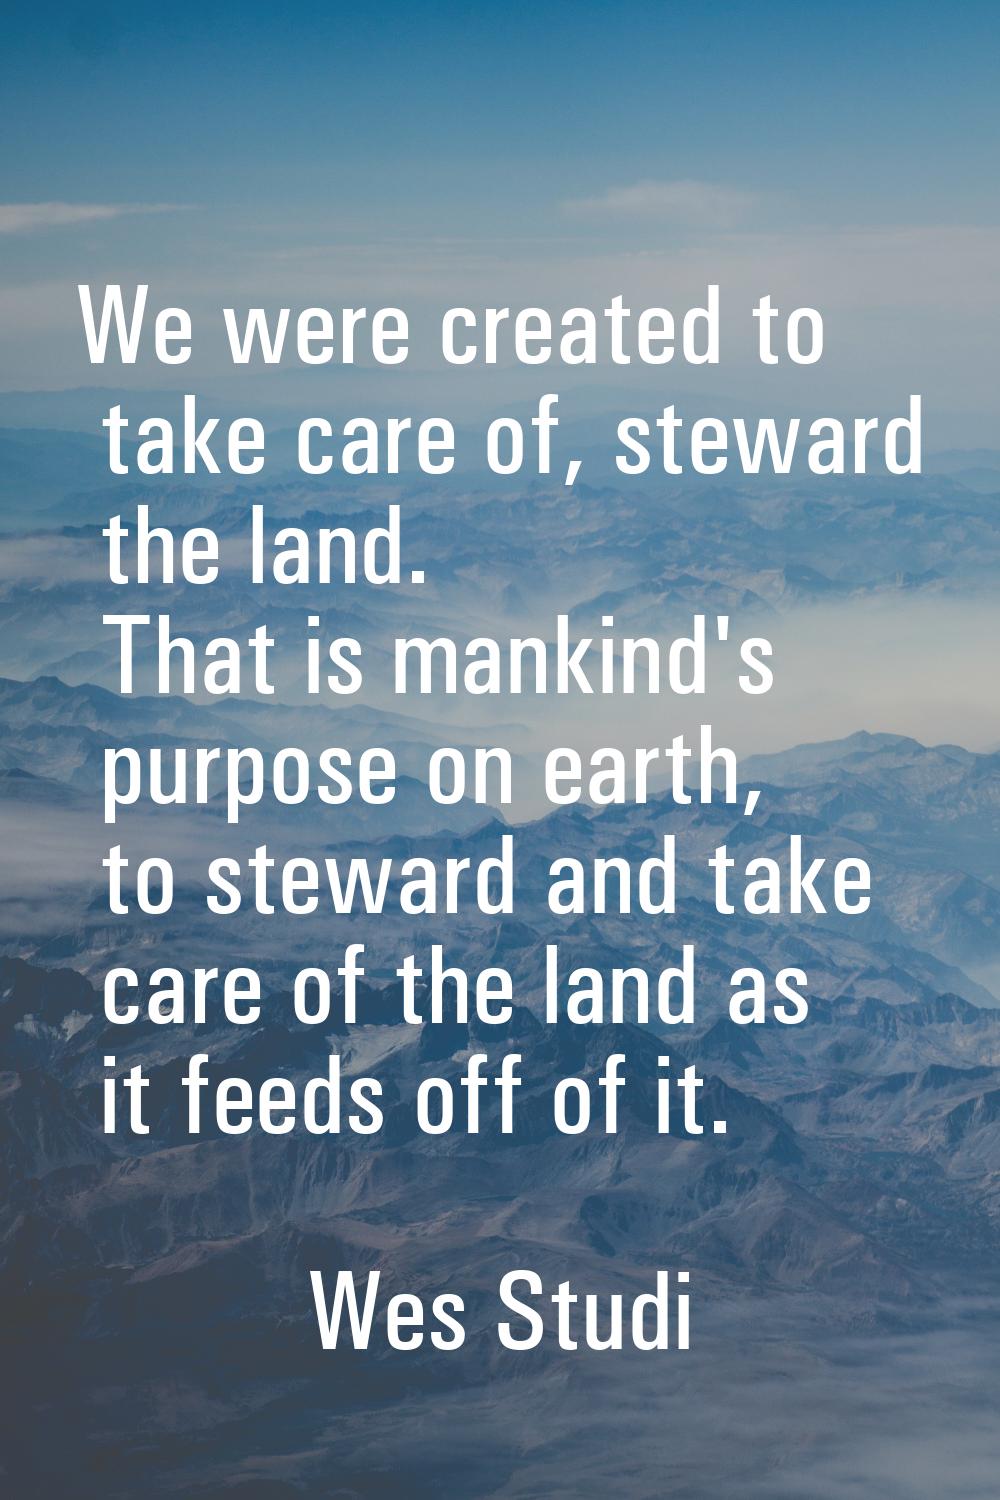 We were created to take care of, steward the land. That is mankind's purpose on earth, to steward a